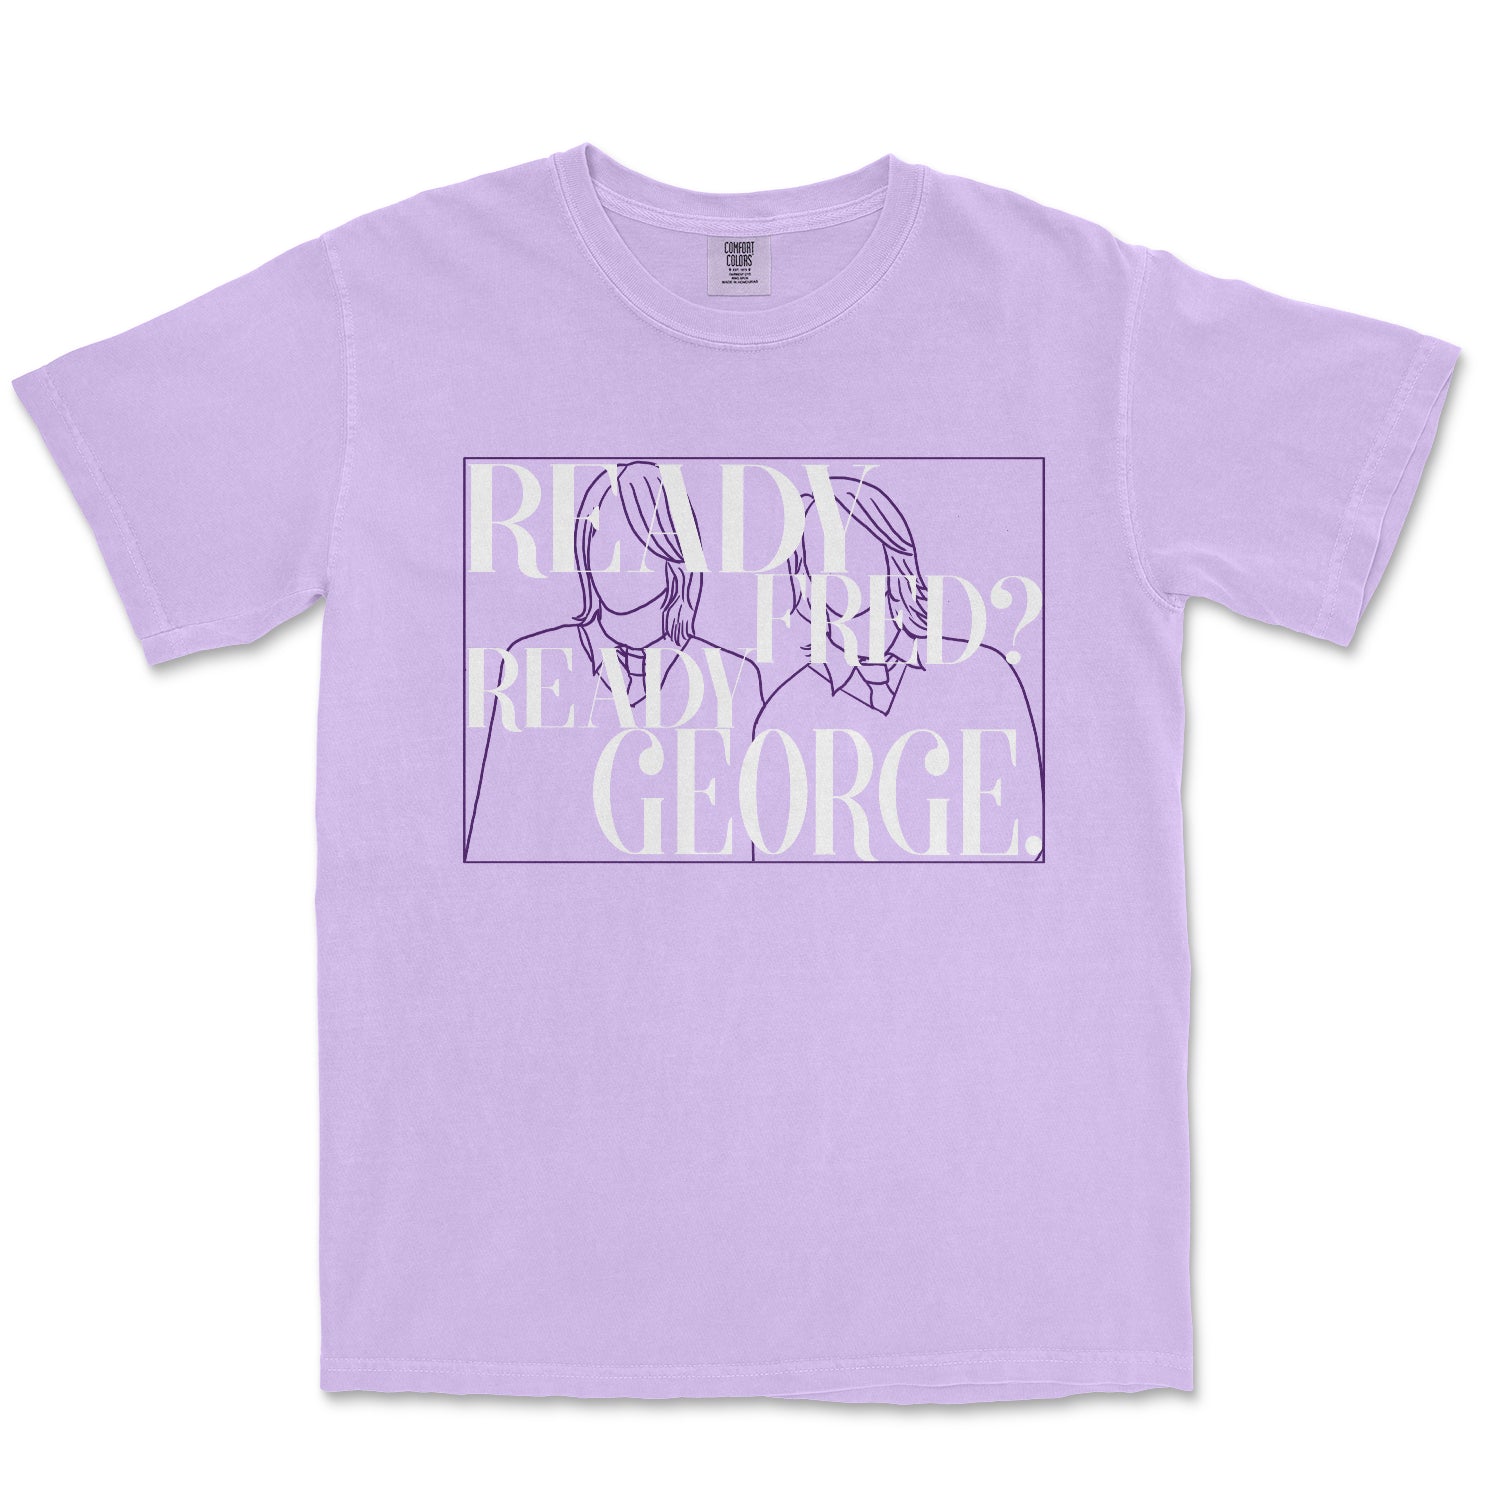 Ready Fred Ready George Garment Dyed Tee